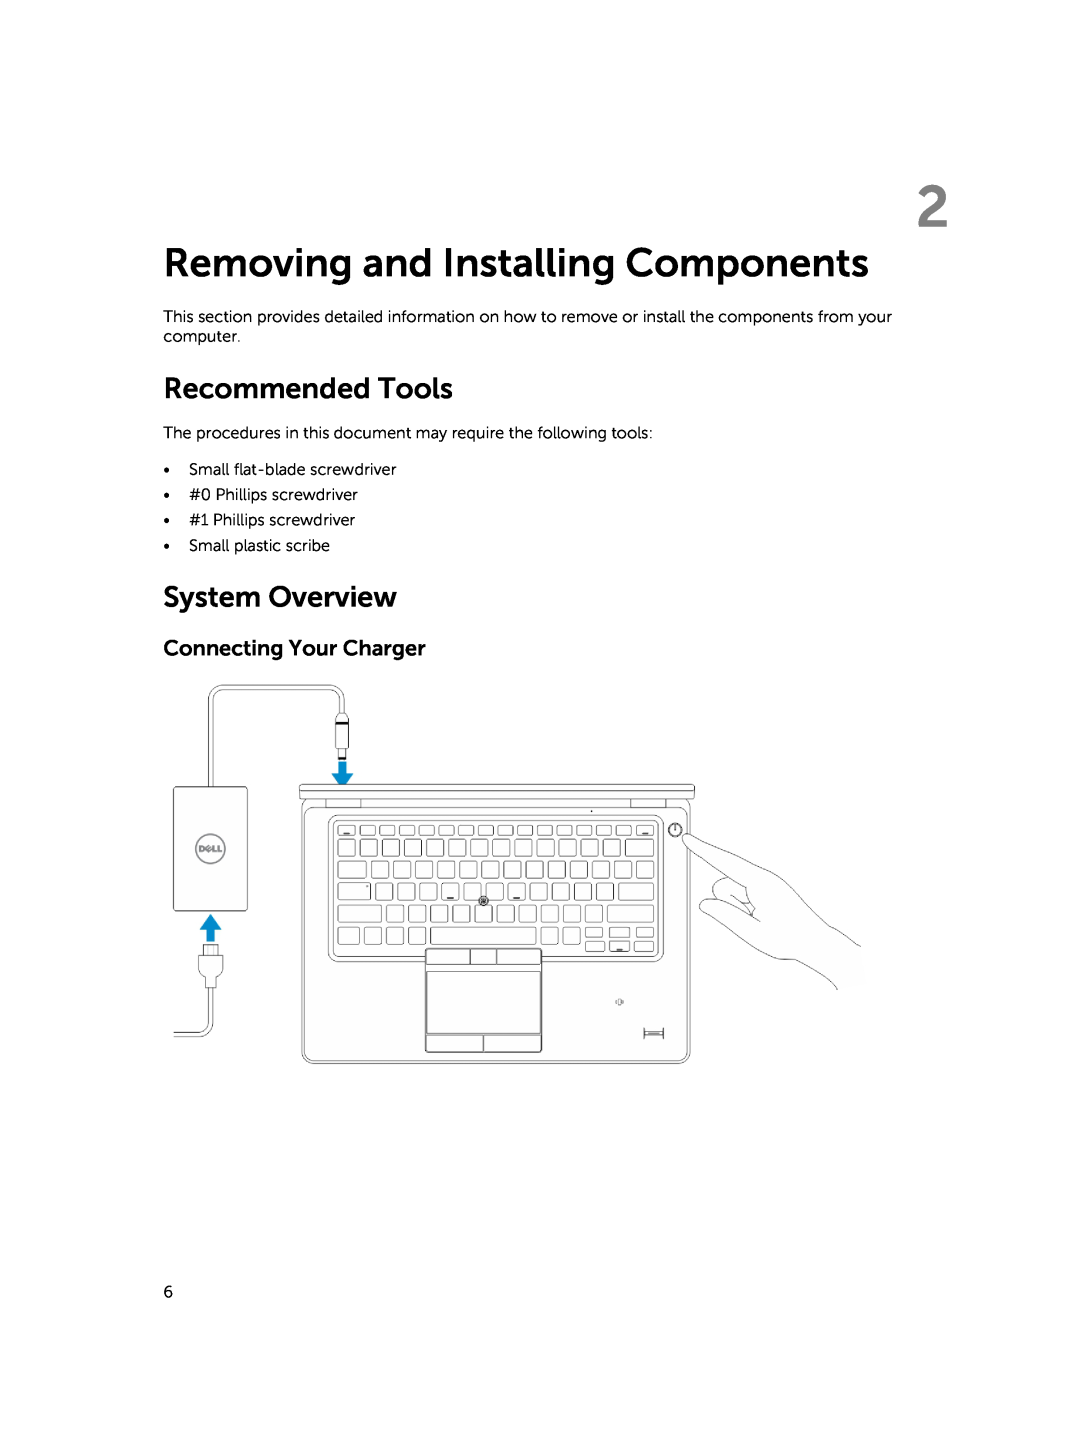 Dell E5450 owner manual Removing and Installing Components, Recommended Tools, System Overview, Connecting Your Charger 